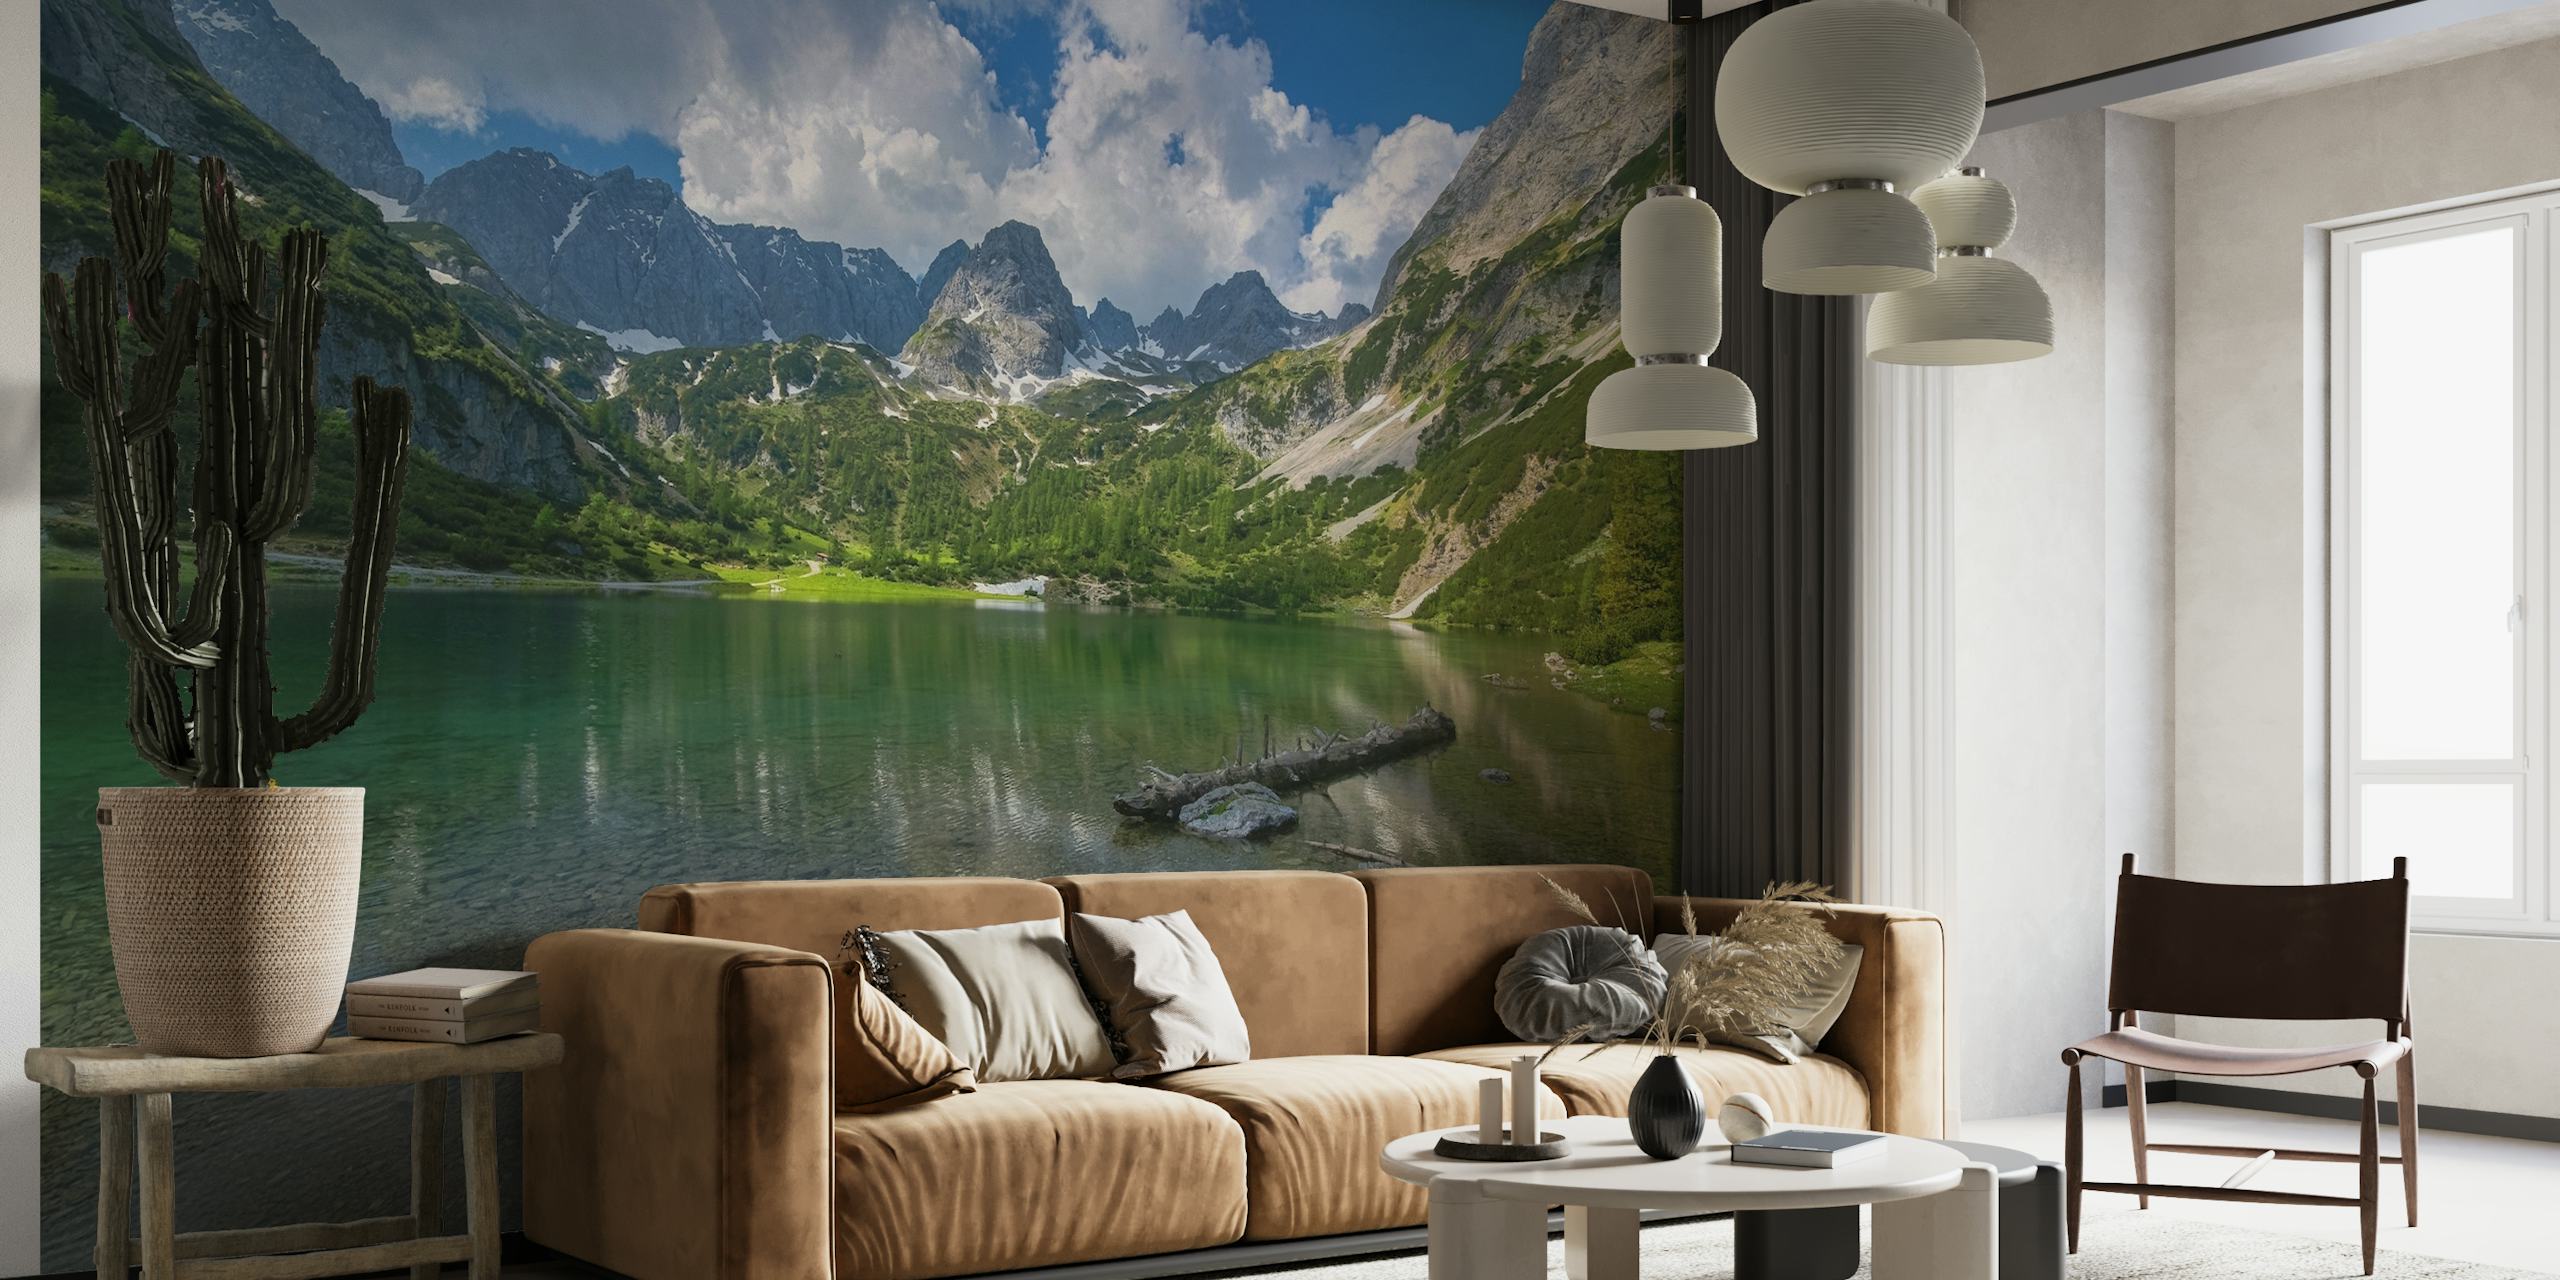 Seebensea at Tirol wall mural depicting a tranquil alpine lake with mountain reflections